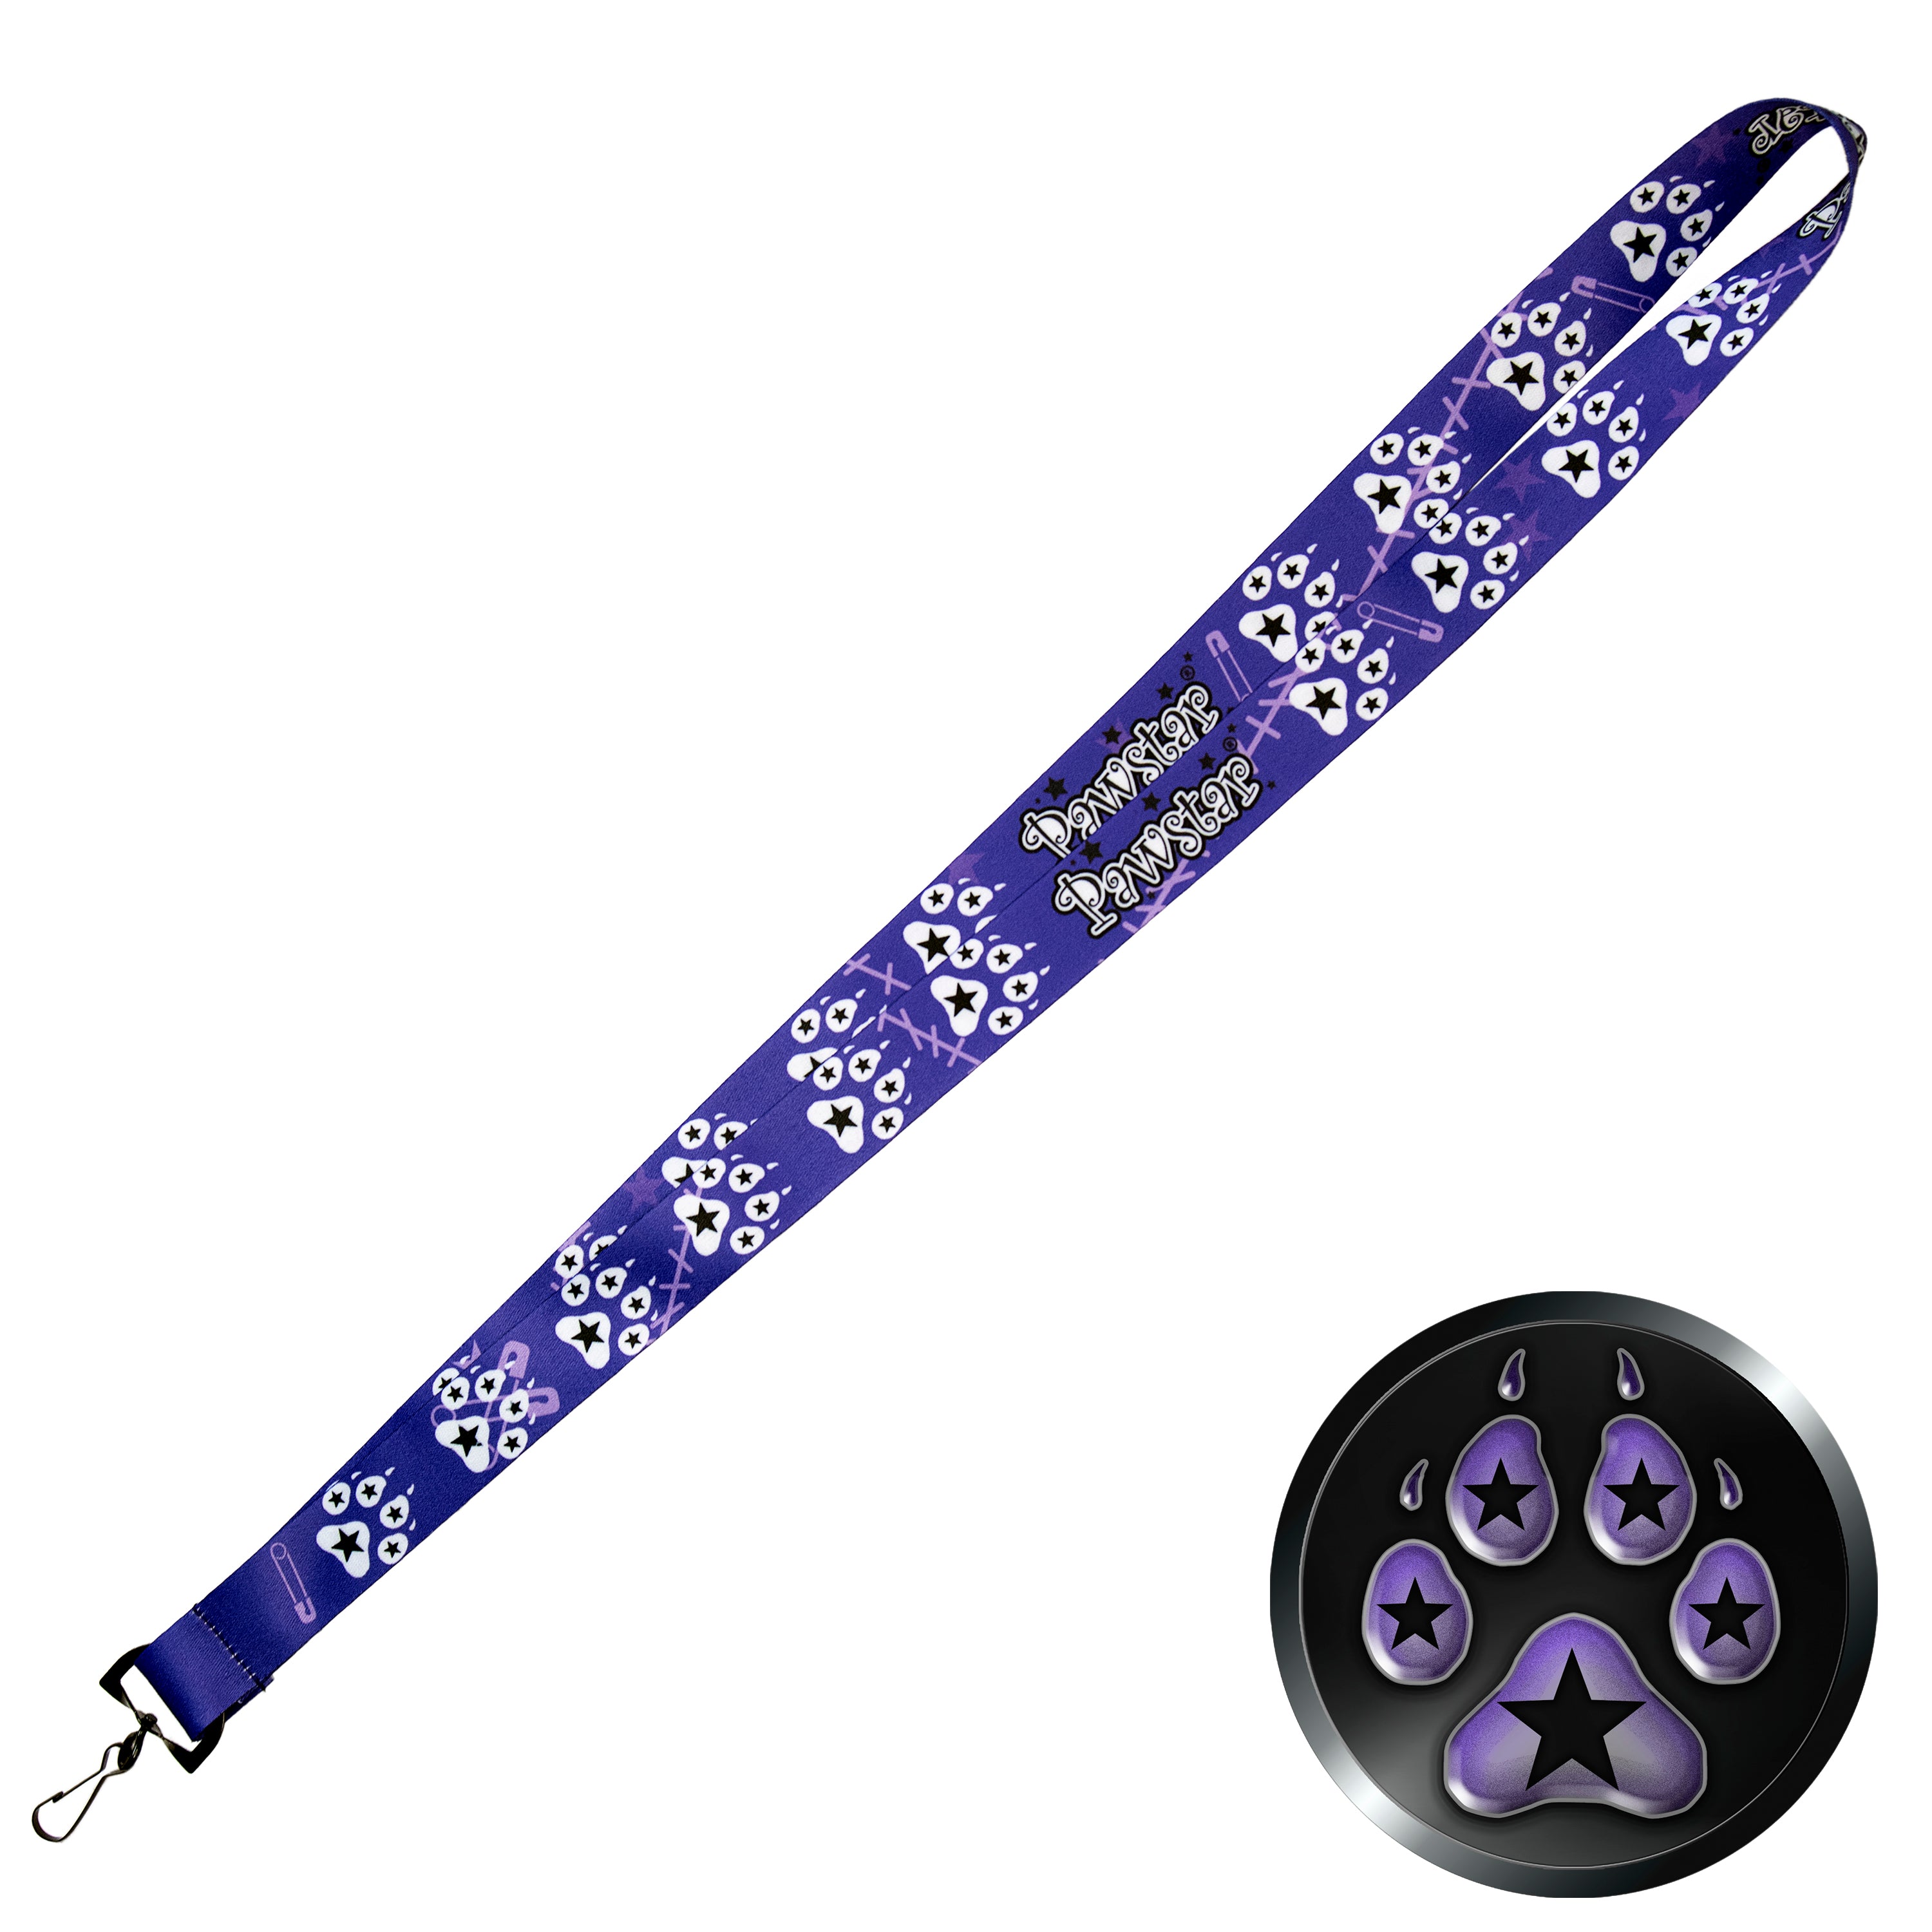 Pawstar Lanyard - Pawstar Pawstar Lanyard autopostr_pinterest_64606, cosplay, costume, furry, ship-15, ship-5day, swag